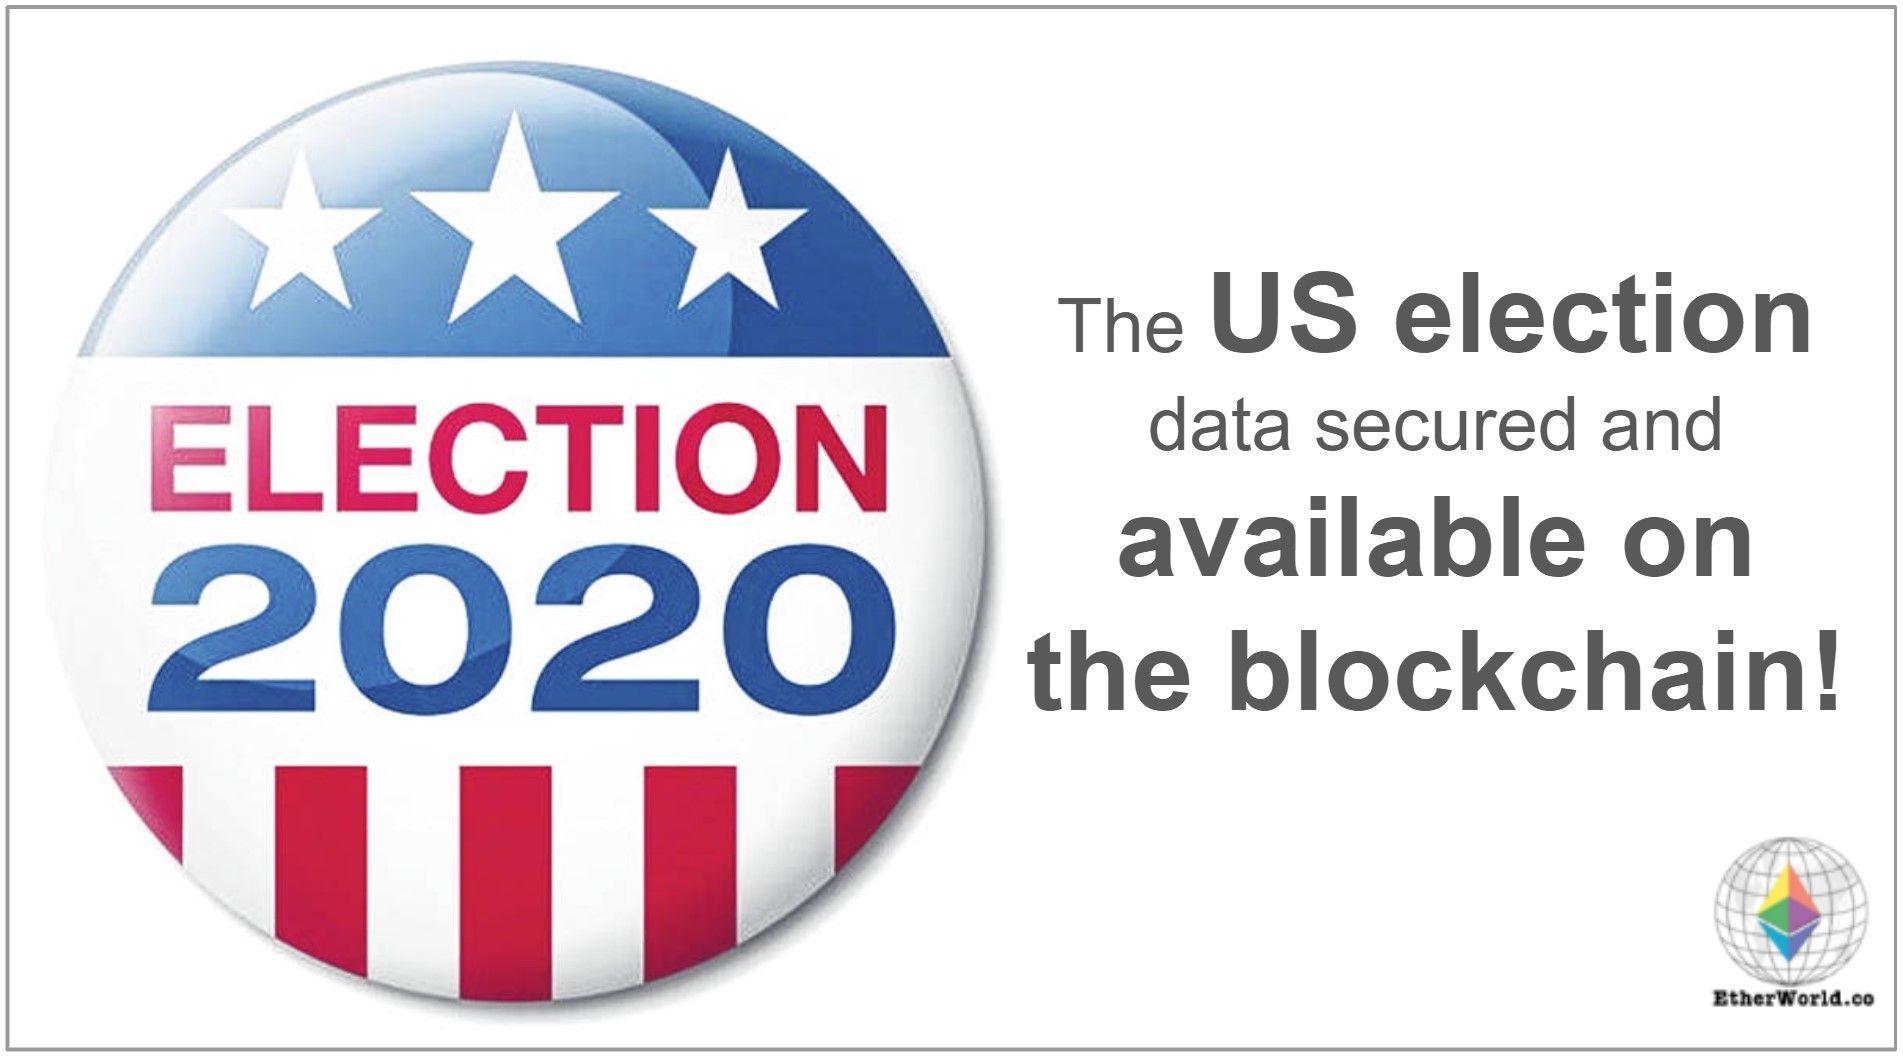 The US election data secured and available on the blockchain-powered by Chainlink!